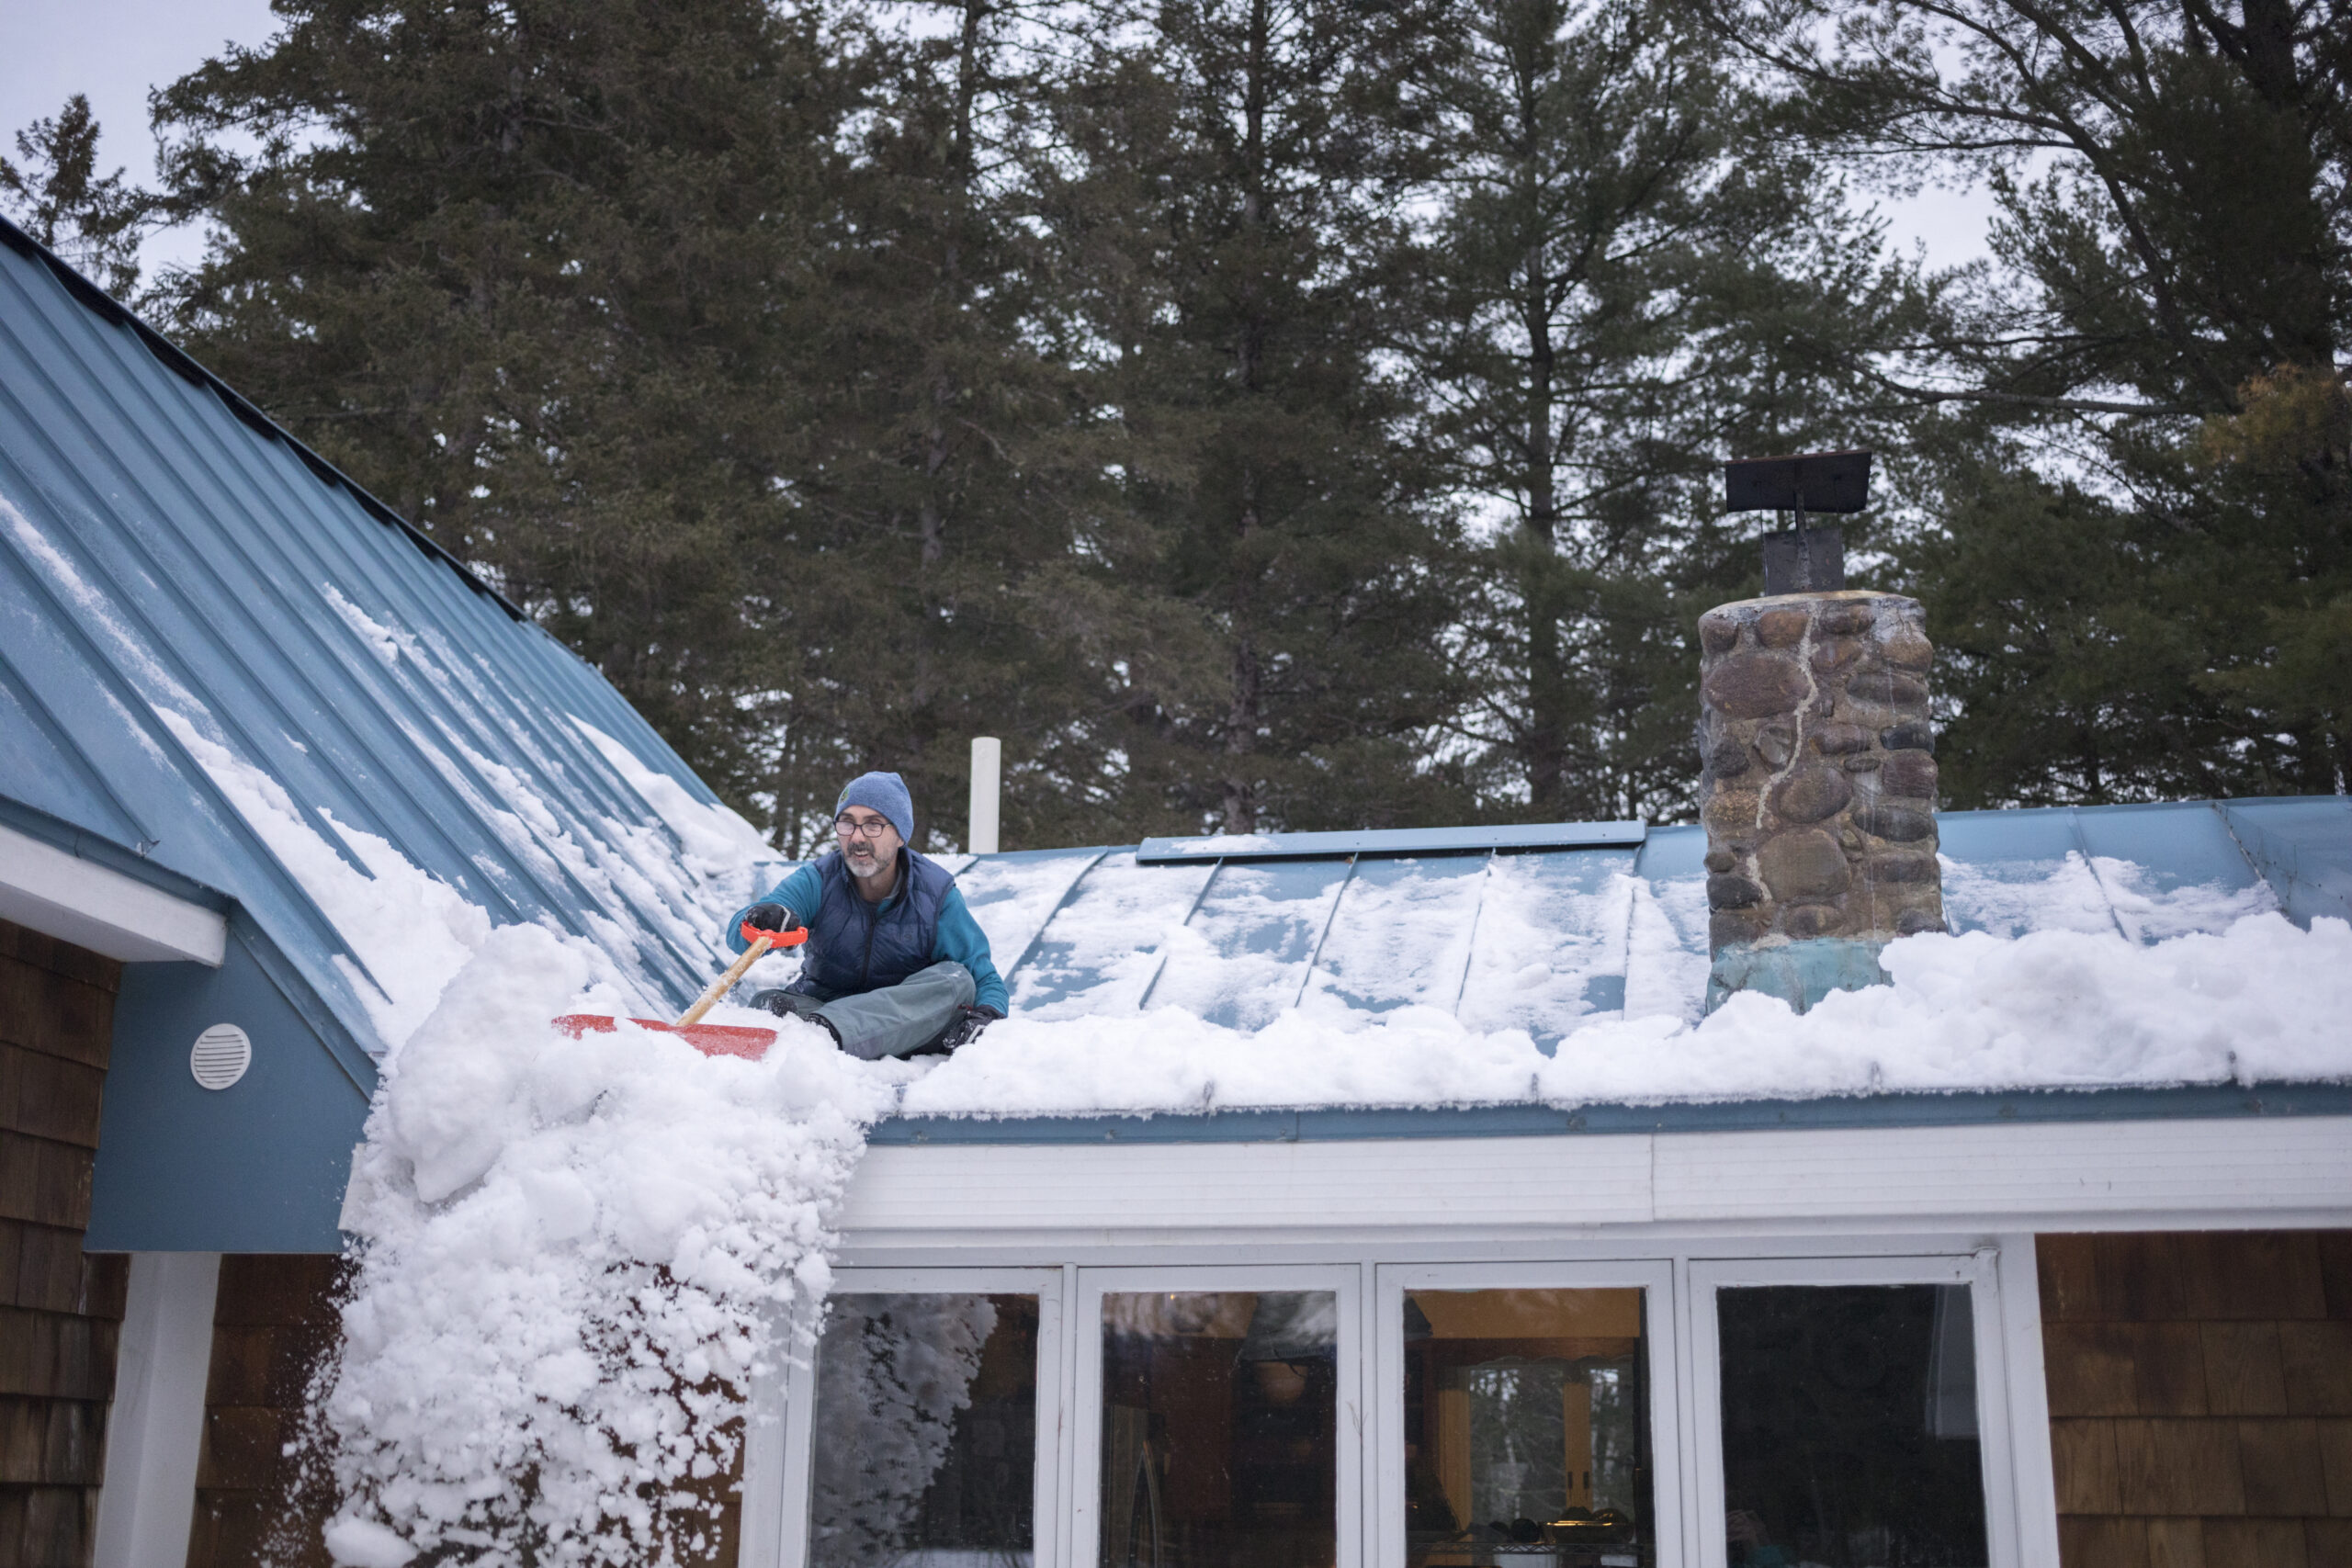 – Winterizing the Roof Checklist: Protecting Your Home from Winter's Wrath